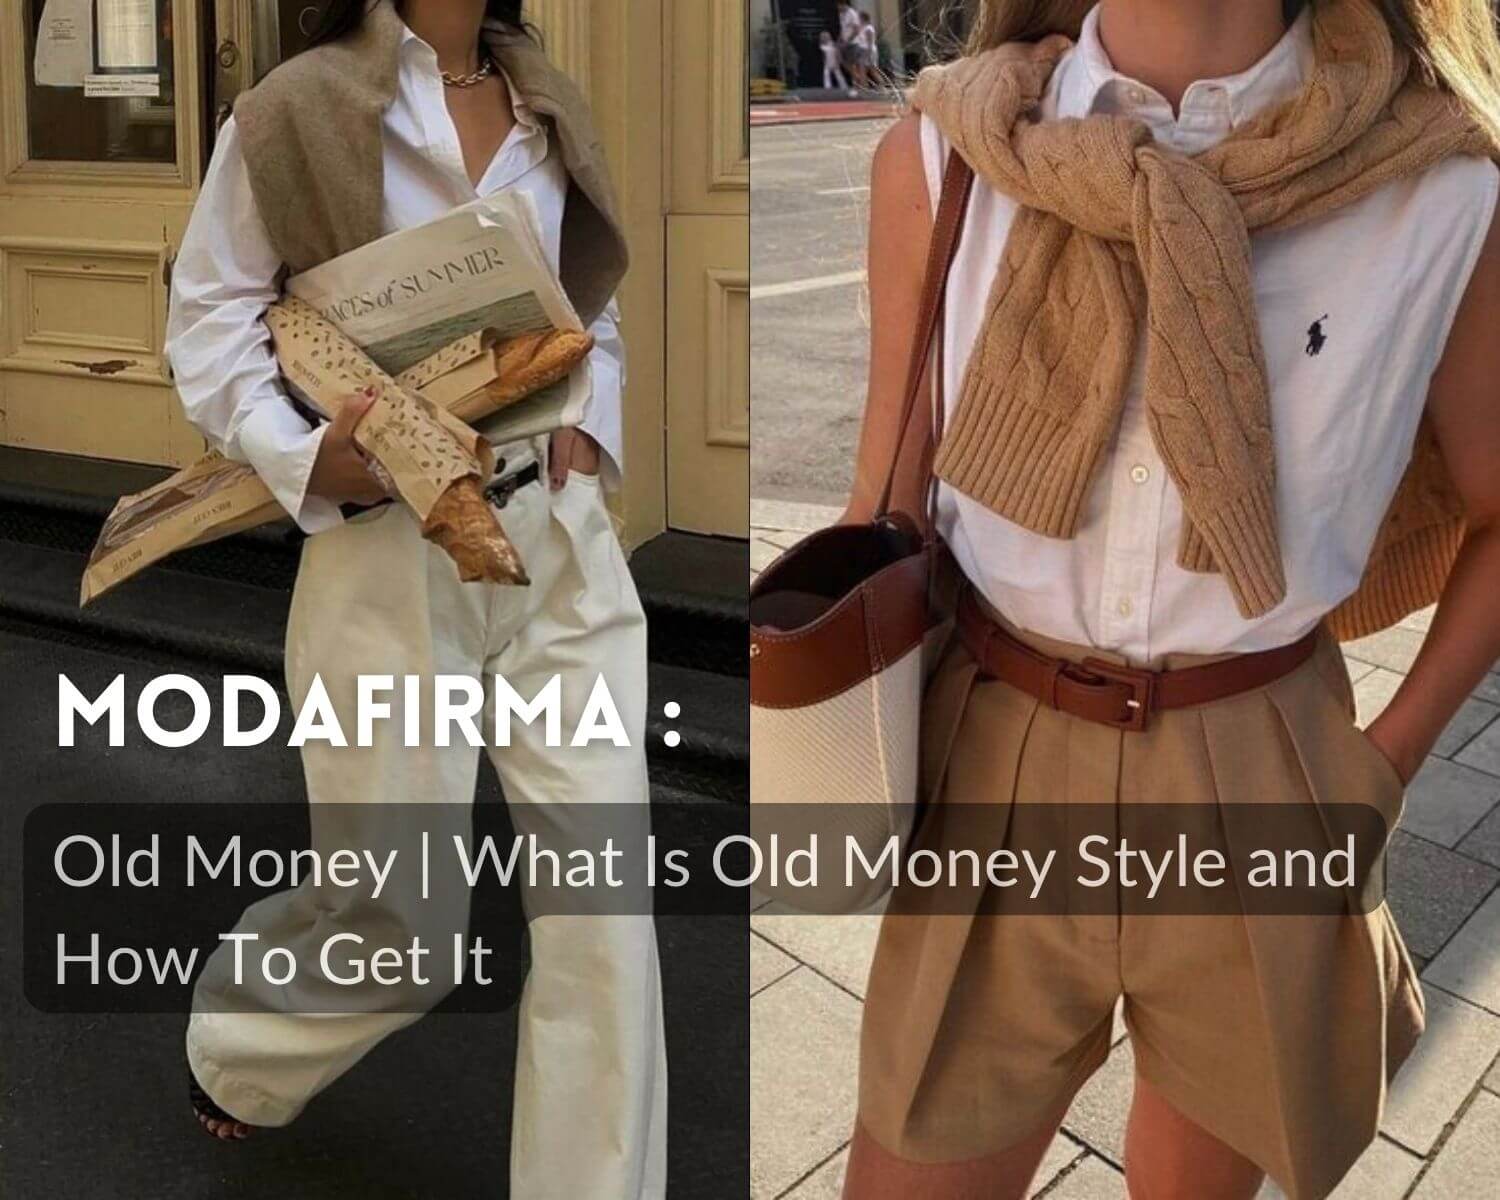 Old Money | What Is Old Money Style and How To Get It